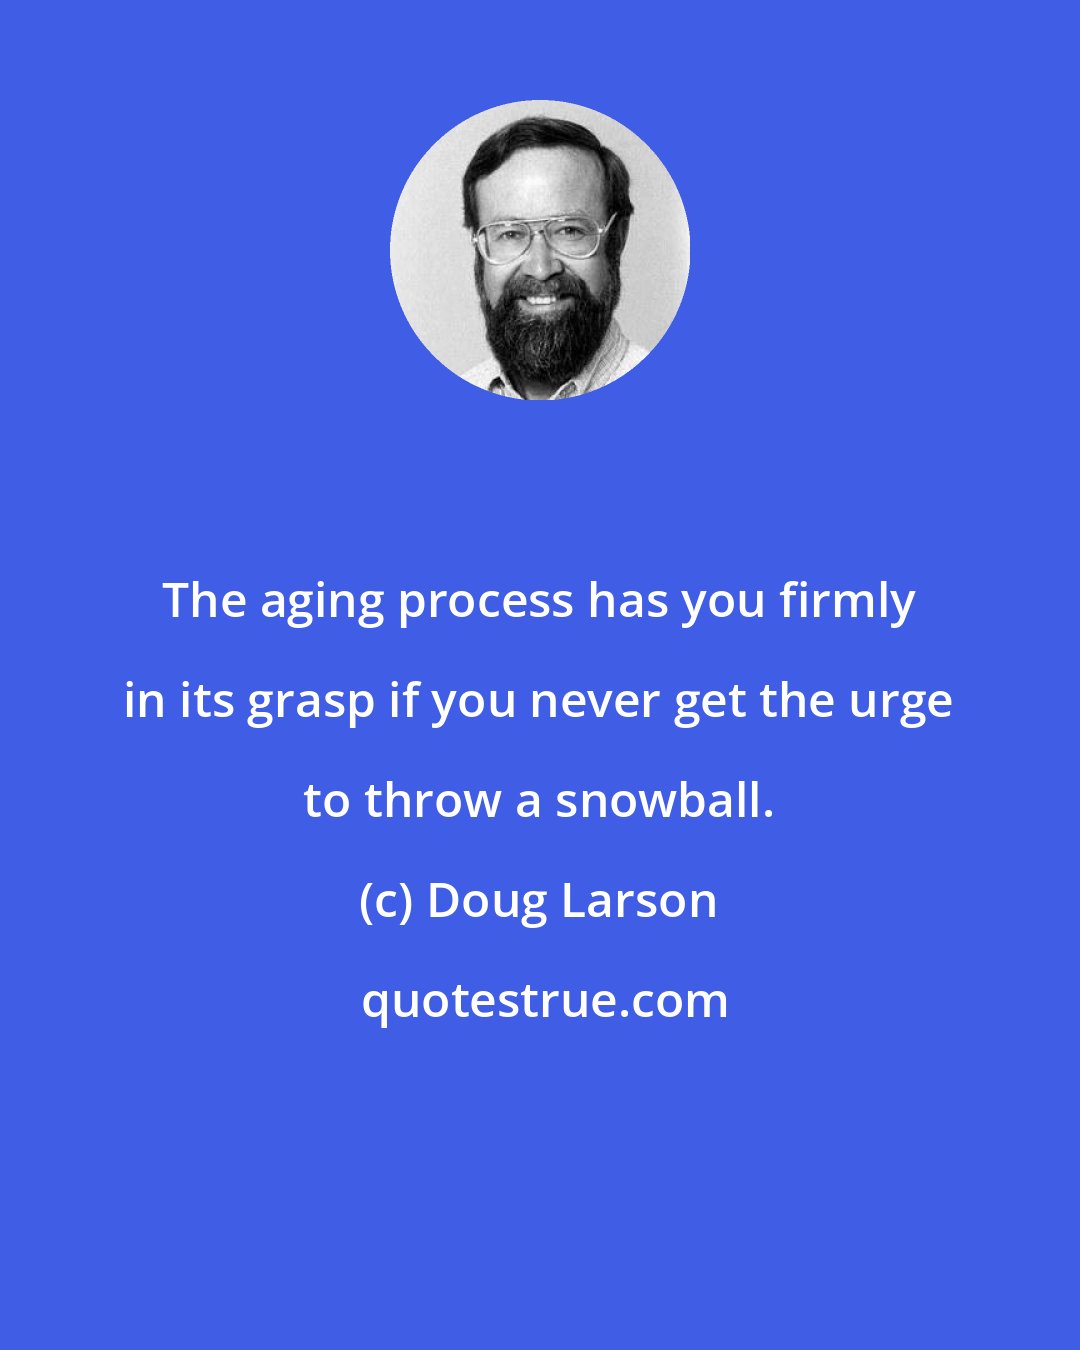 Doug Larson: The aging process has you firmly in its grasp if you never get the urge to throw a snowball.